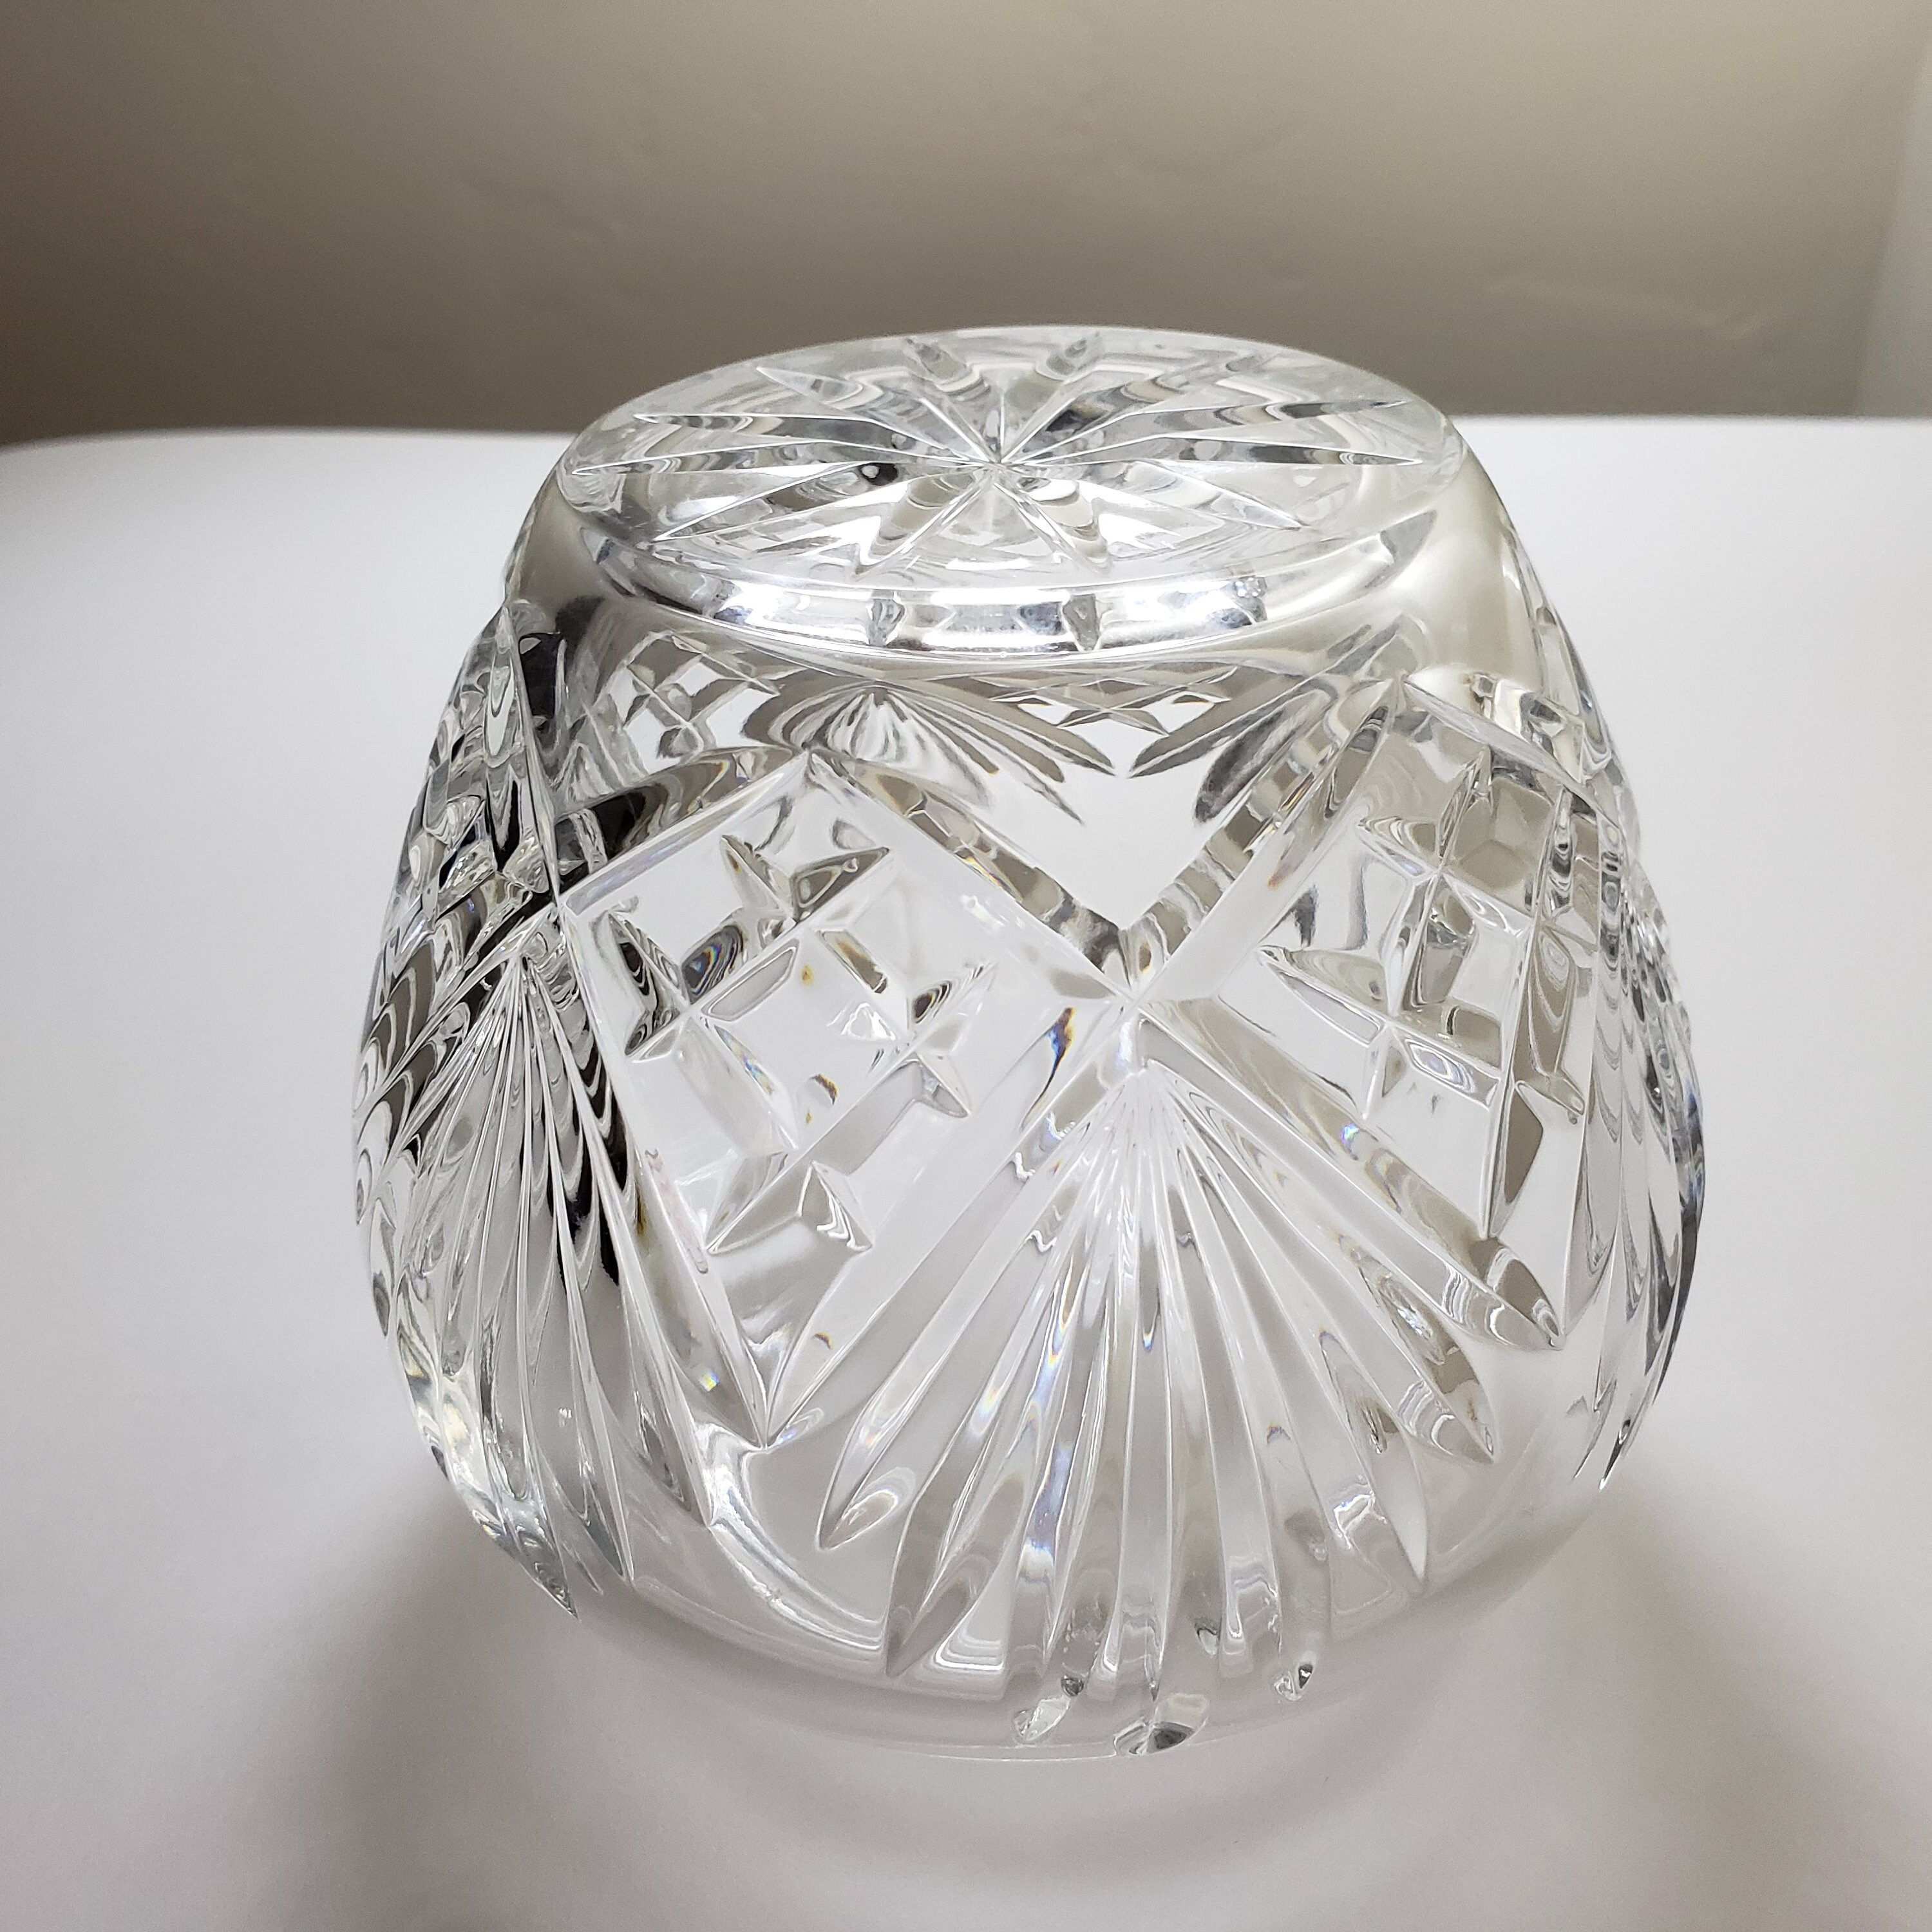 Polished Crystal Vase by Crystal Clear Made in Poland - Etsy